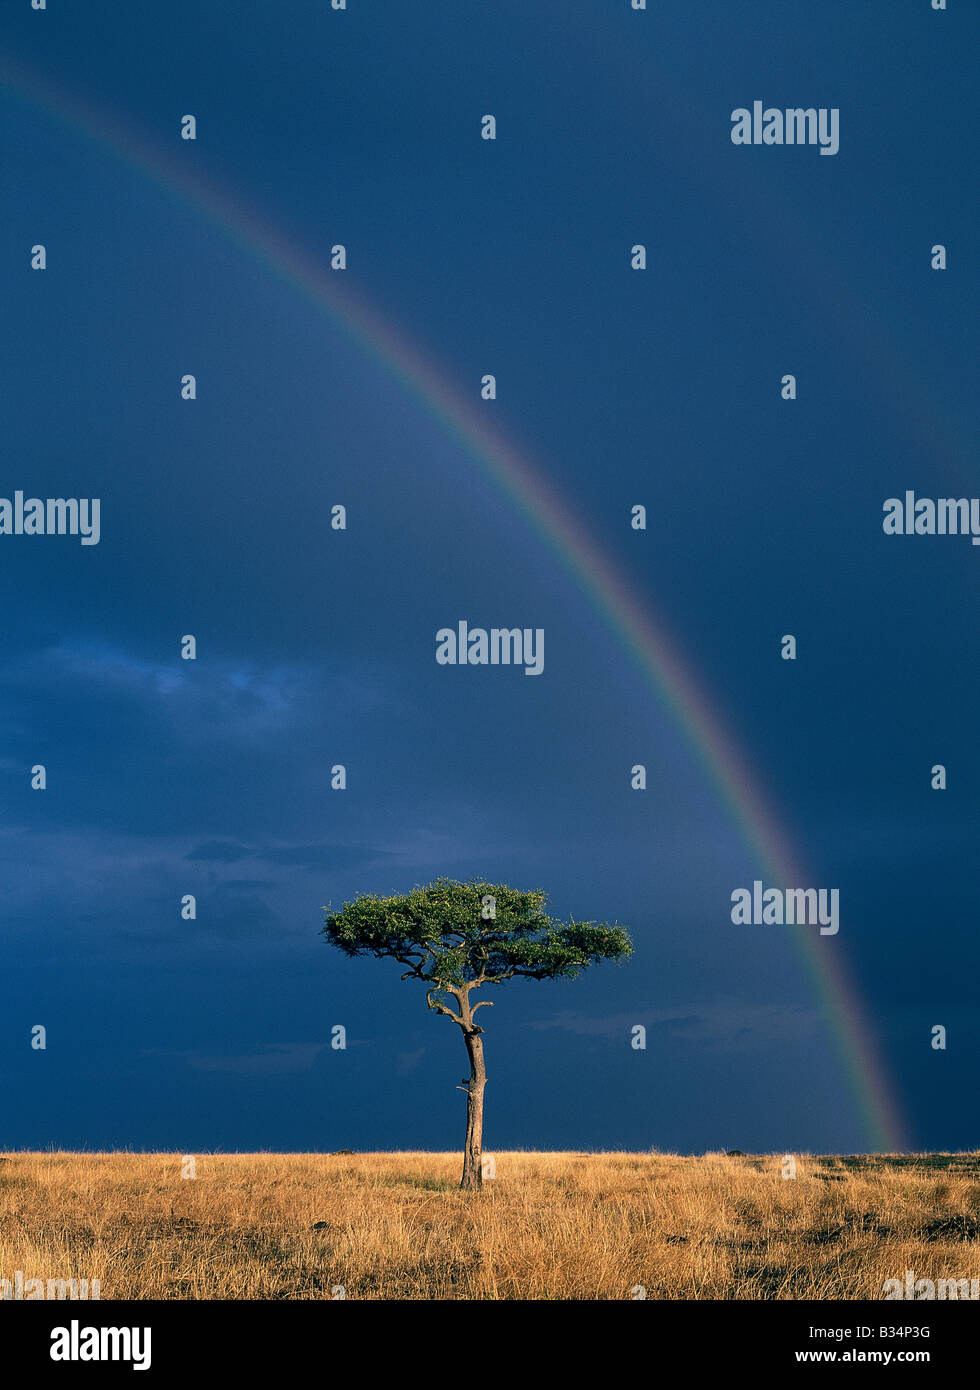 Kenya, Narok, Masai Mara. As the late afternoon sun bathes a lone Balanites tree and the red oat grass of the Mara plains in golden light, distant storm clouds and a double rainbow fill the sky. Stock Photo